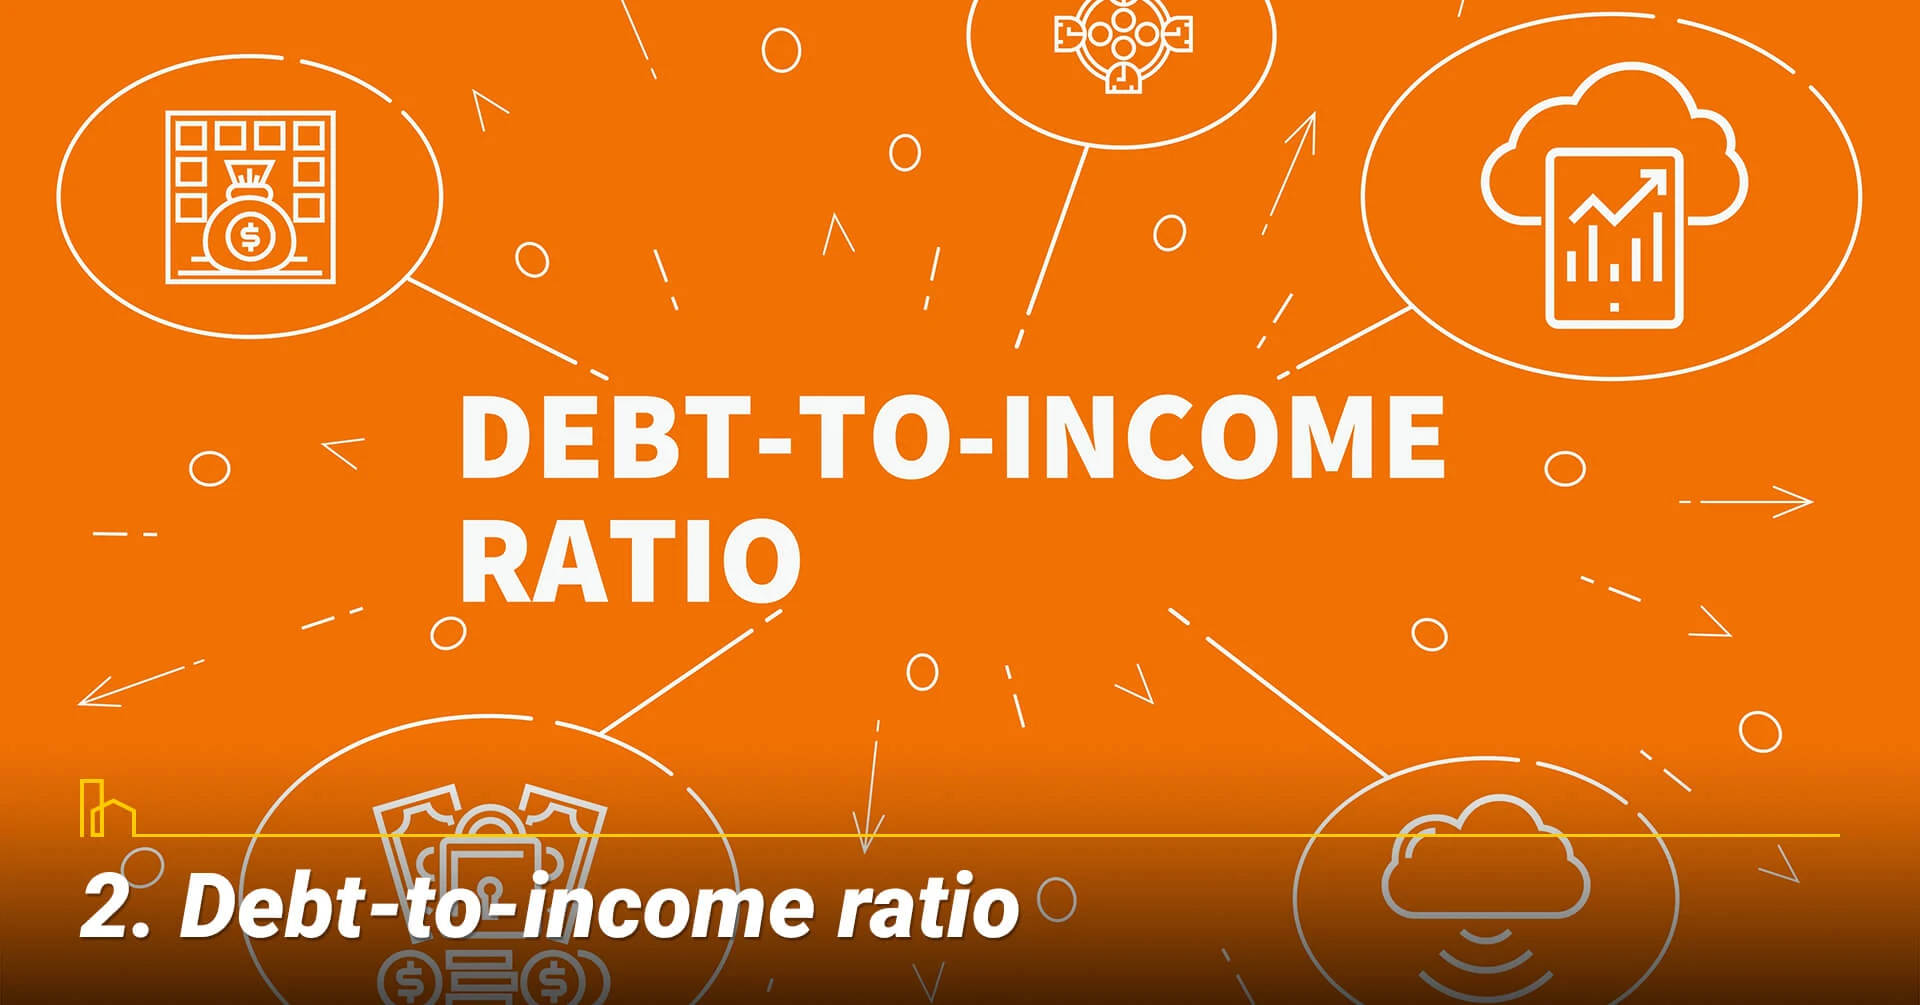 Debt-to-income ratio, know how much you owe and how much you make